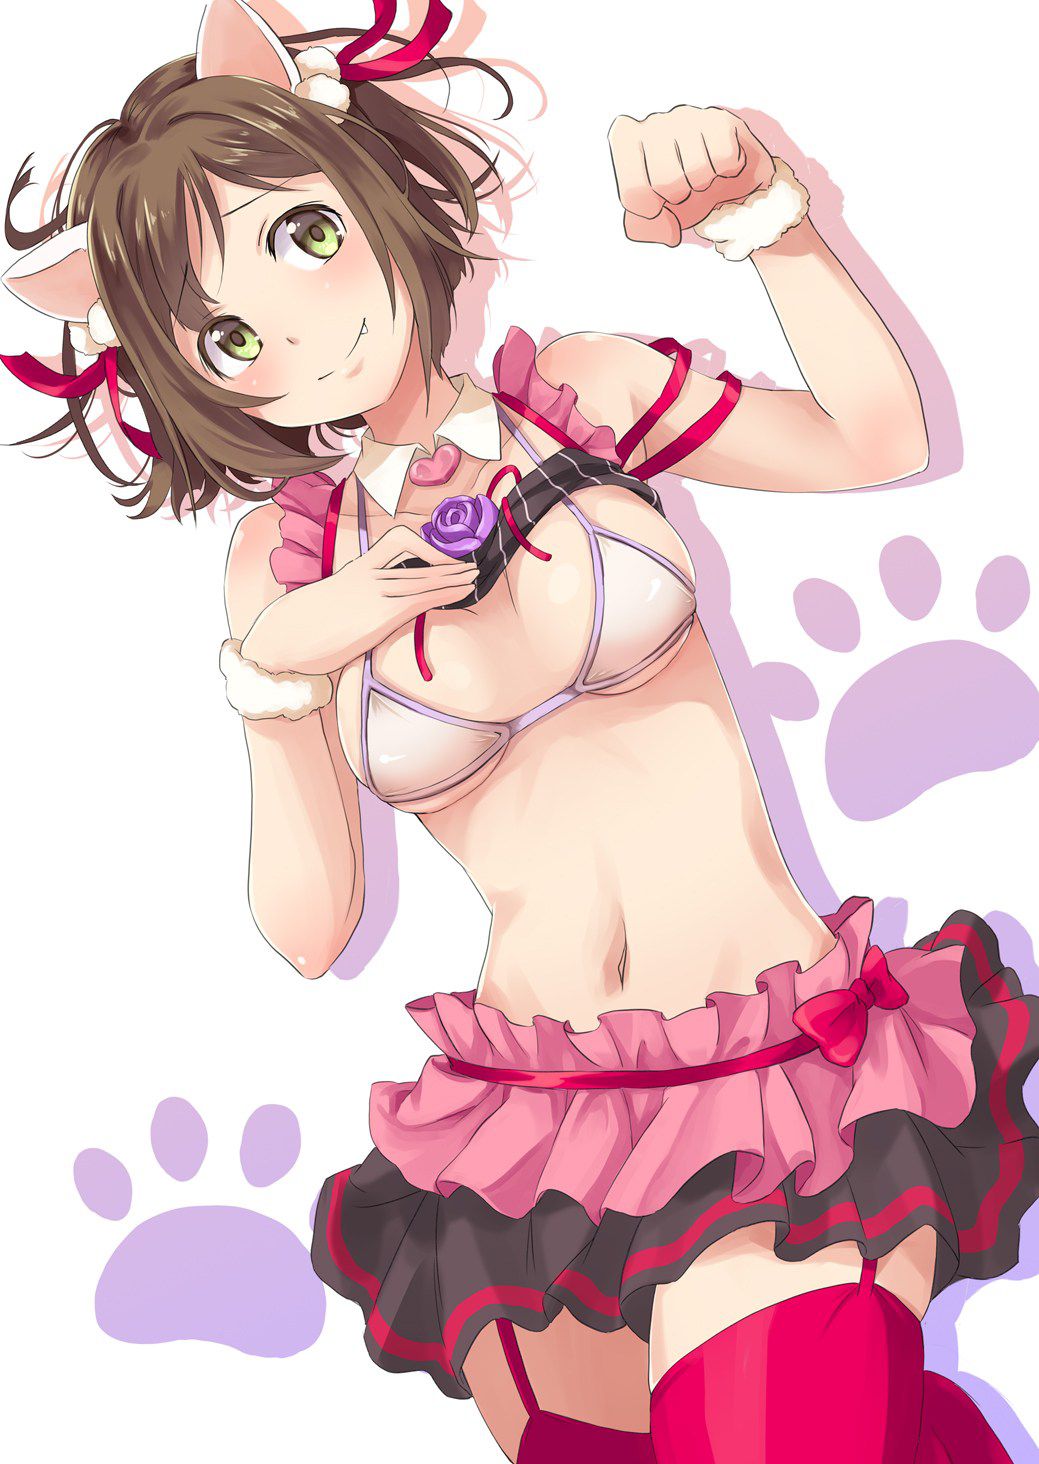 [48 pictures] Cinderella girls Maekawa in very erotic pictures! Part 3 21